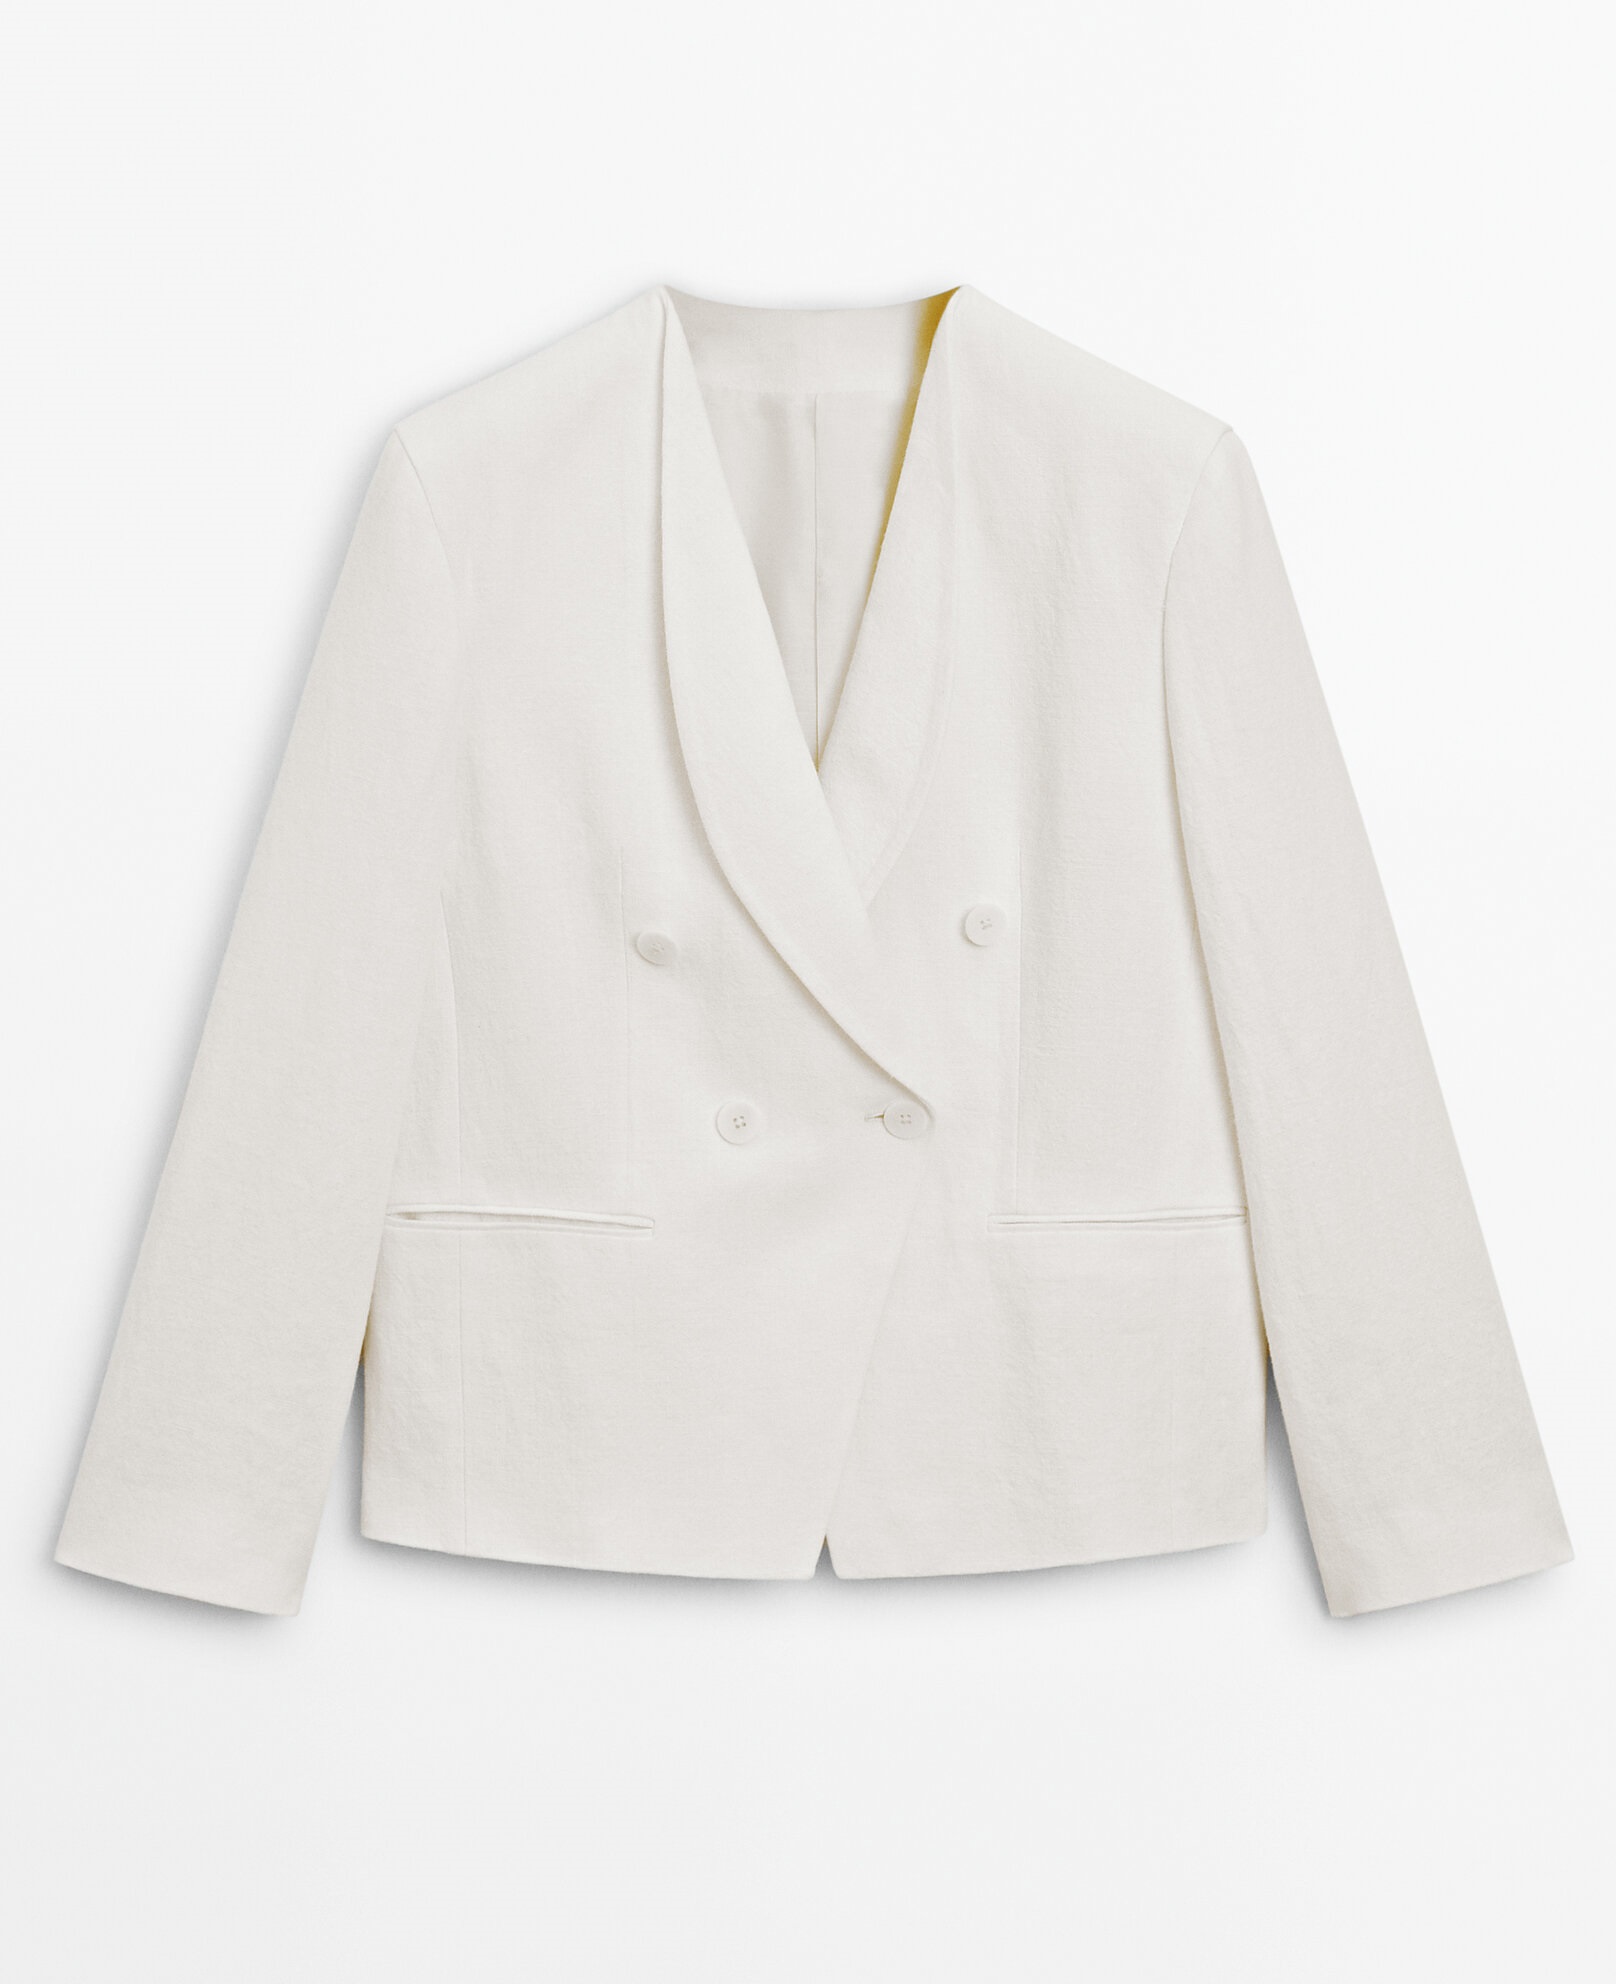 Пиджак Massimo Dutti Double-breasted Linen Suit With Flap Detail, белый пиджак zara suit with seersucker detail светло серый